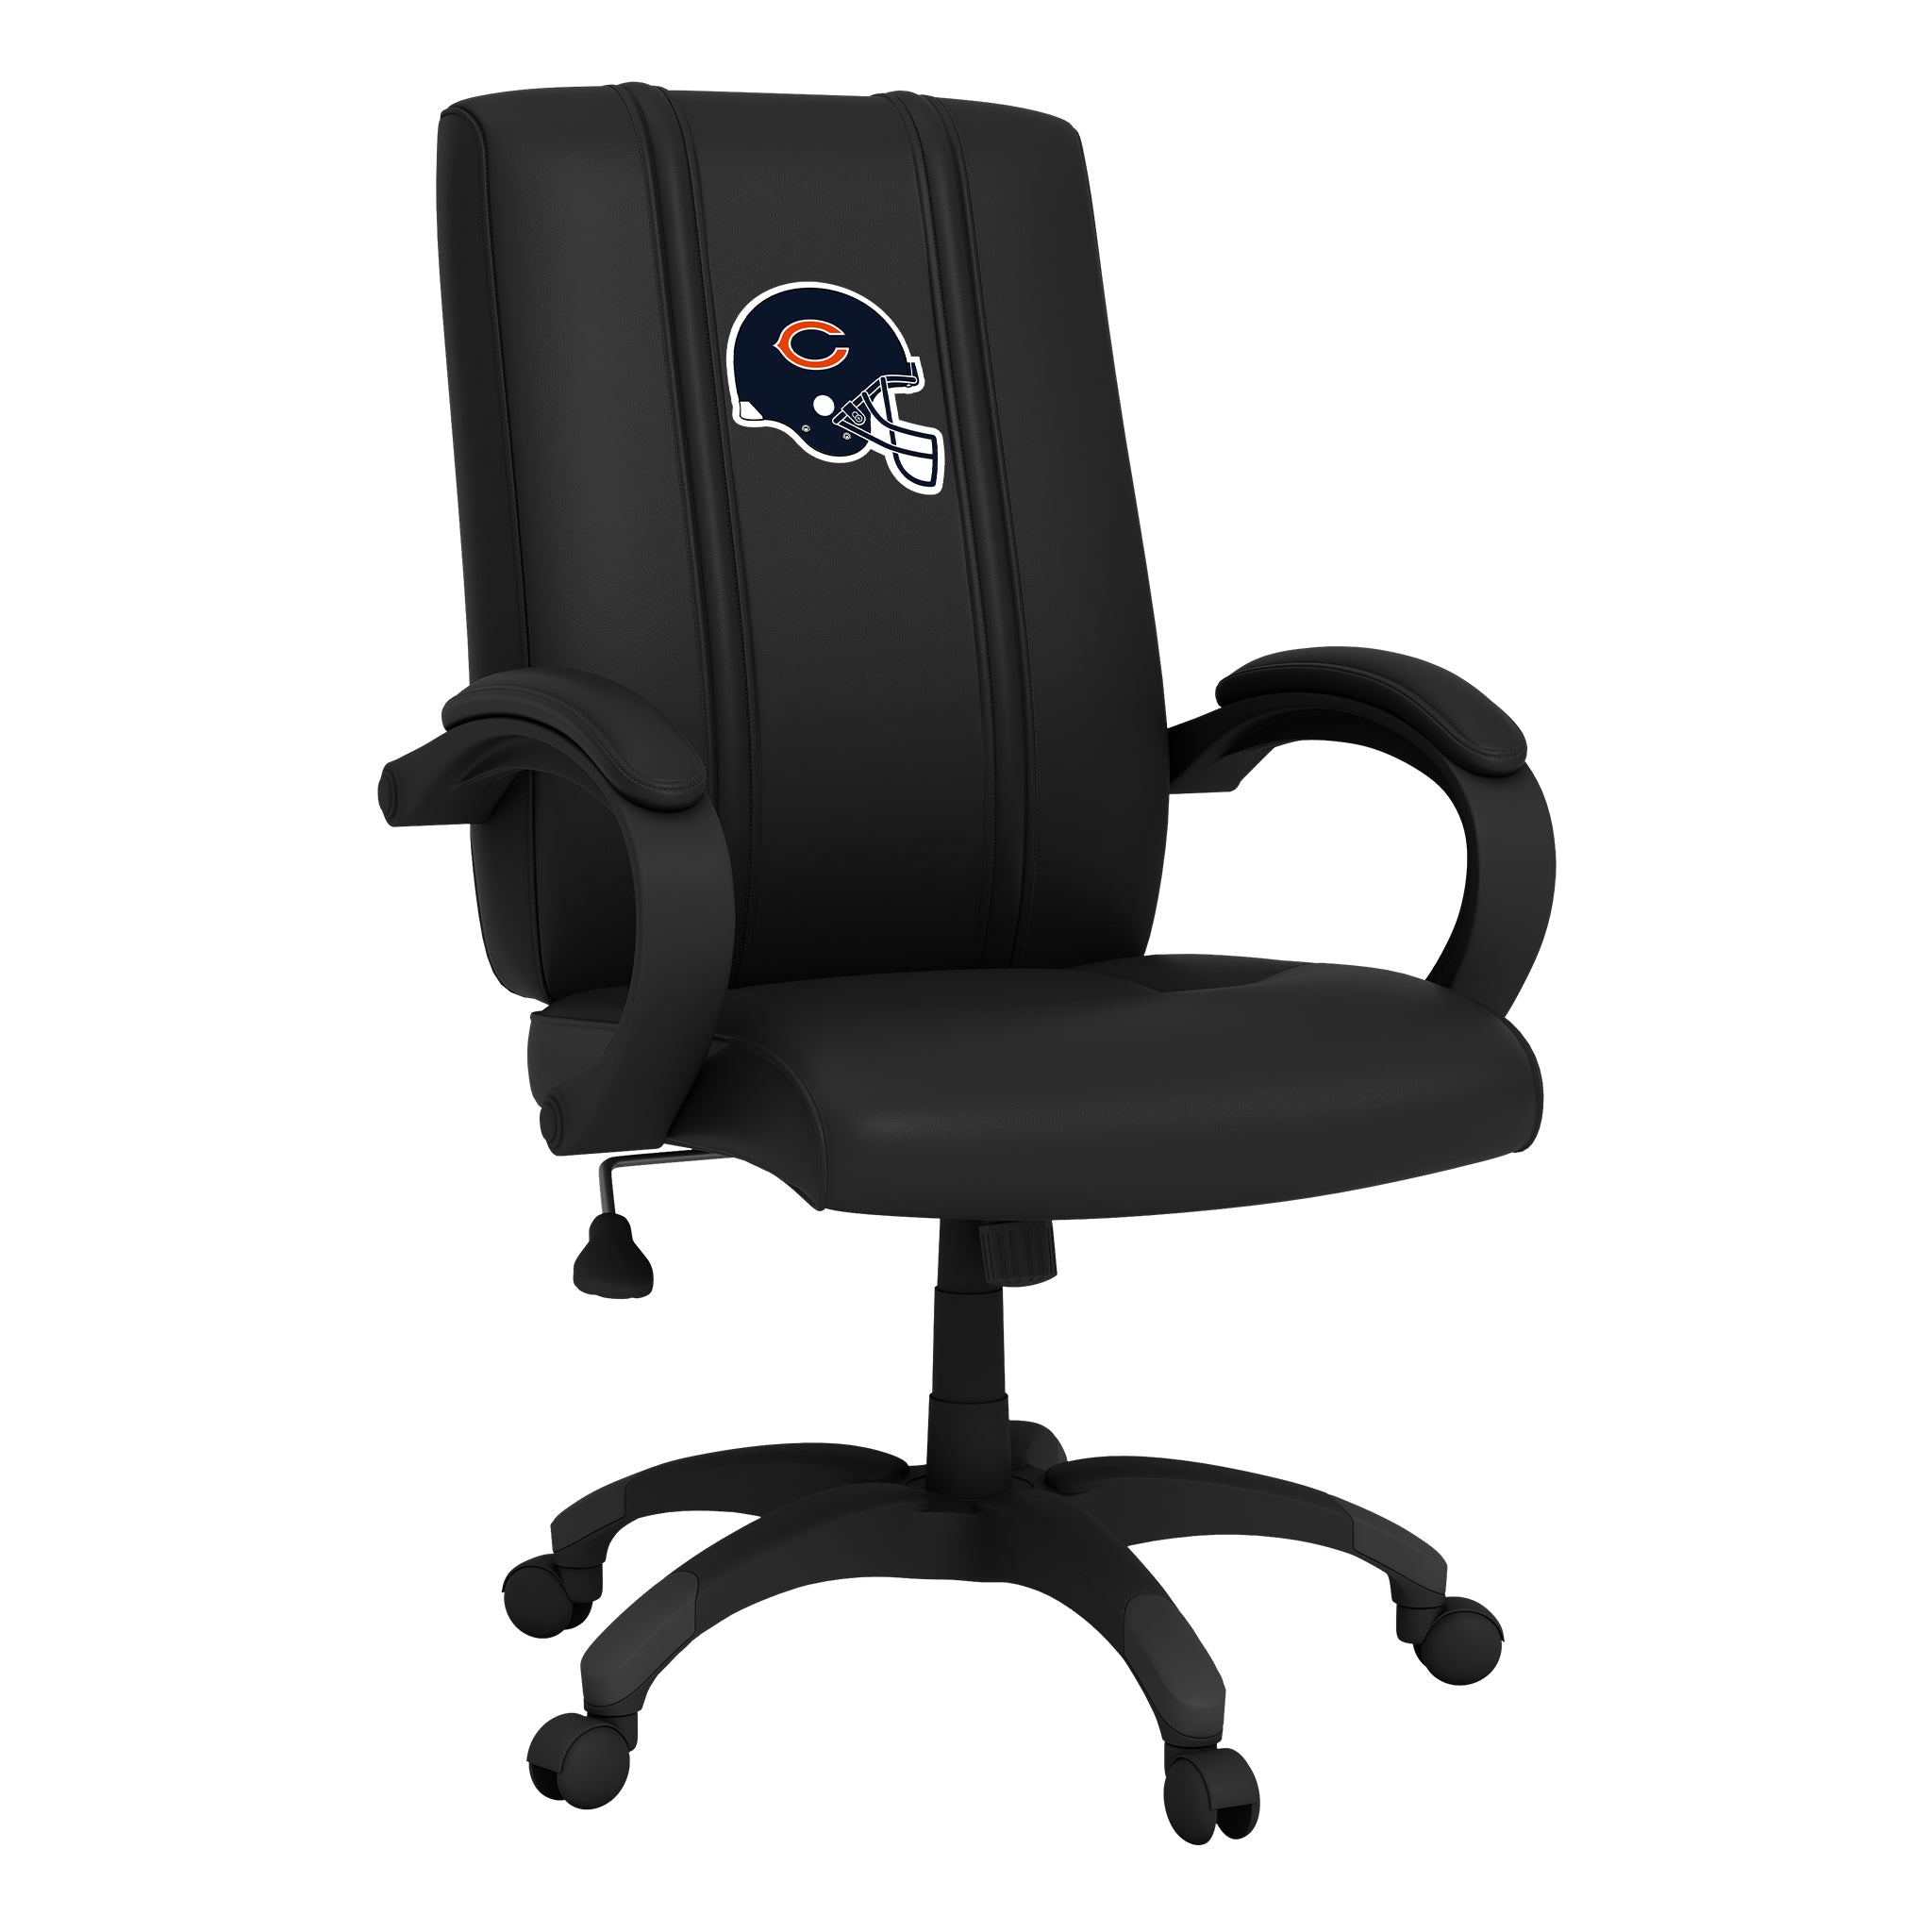 Chicago Bears Office Chair 1000